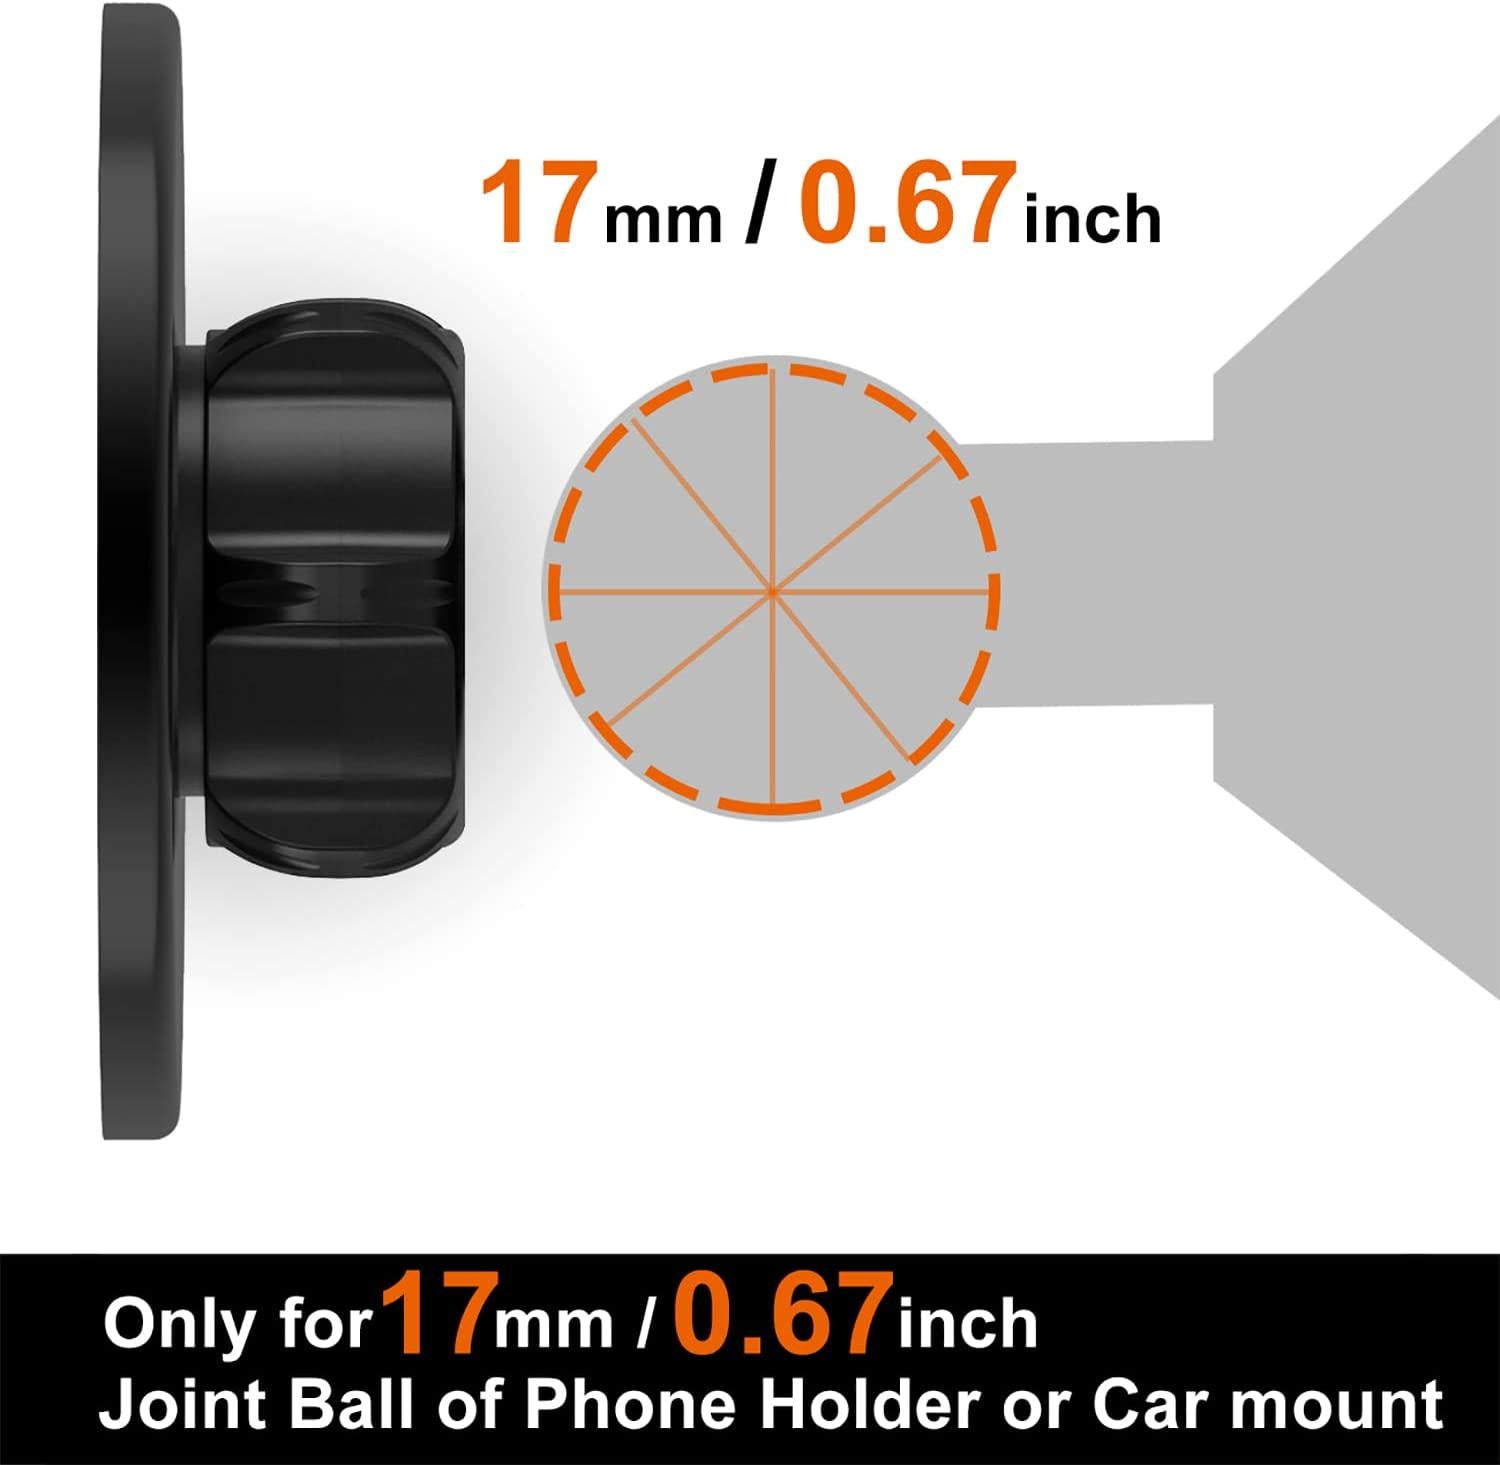 metisinno, metisinno MagSafe Compatible Car Mount Base for iPhone 13 12 Magnetic Accessories, Only for Diameter 17mm/0.67 inch Universal Joint Ball of Phone Holder or Car mount, Vent, Dashboard, Windshield &More